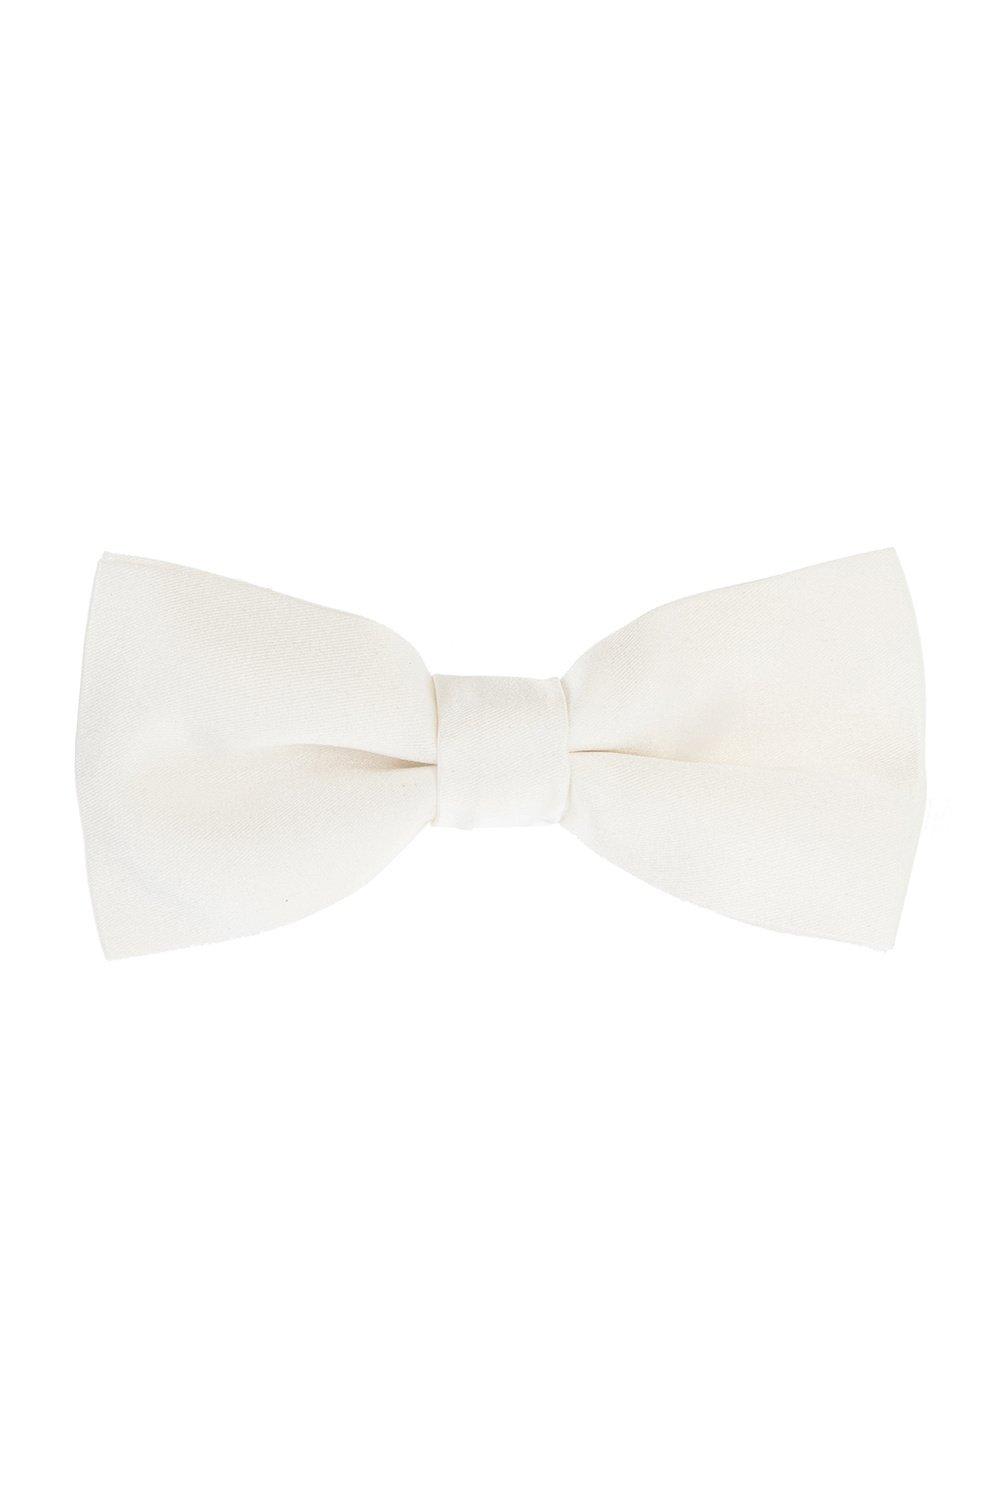 Shop Givenchy Papillon Hook-clipped Bow Tie